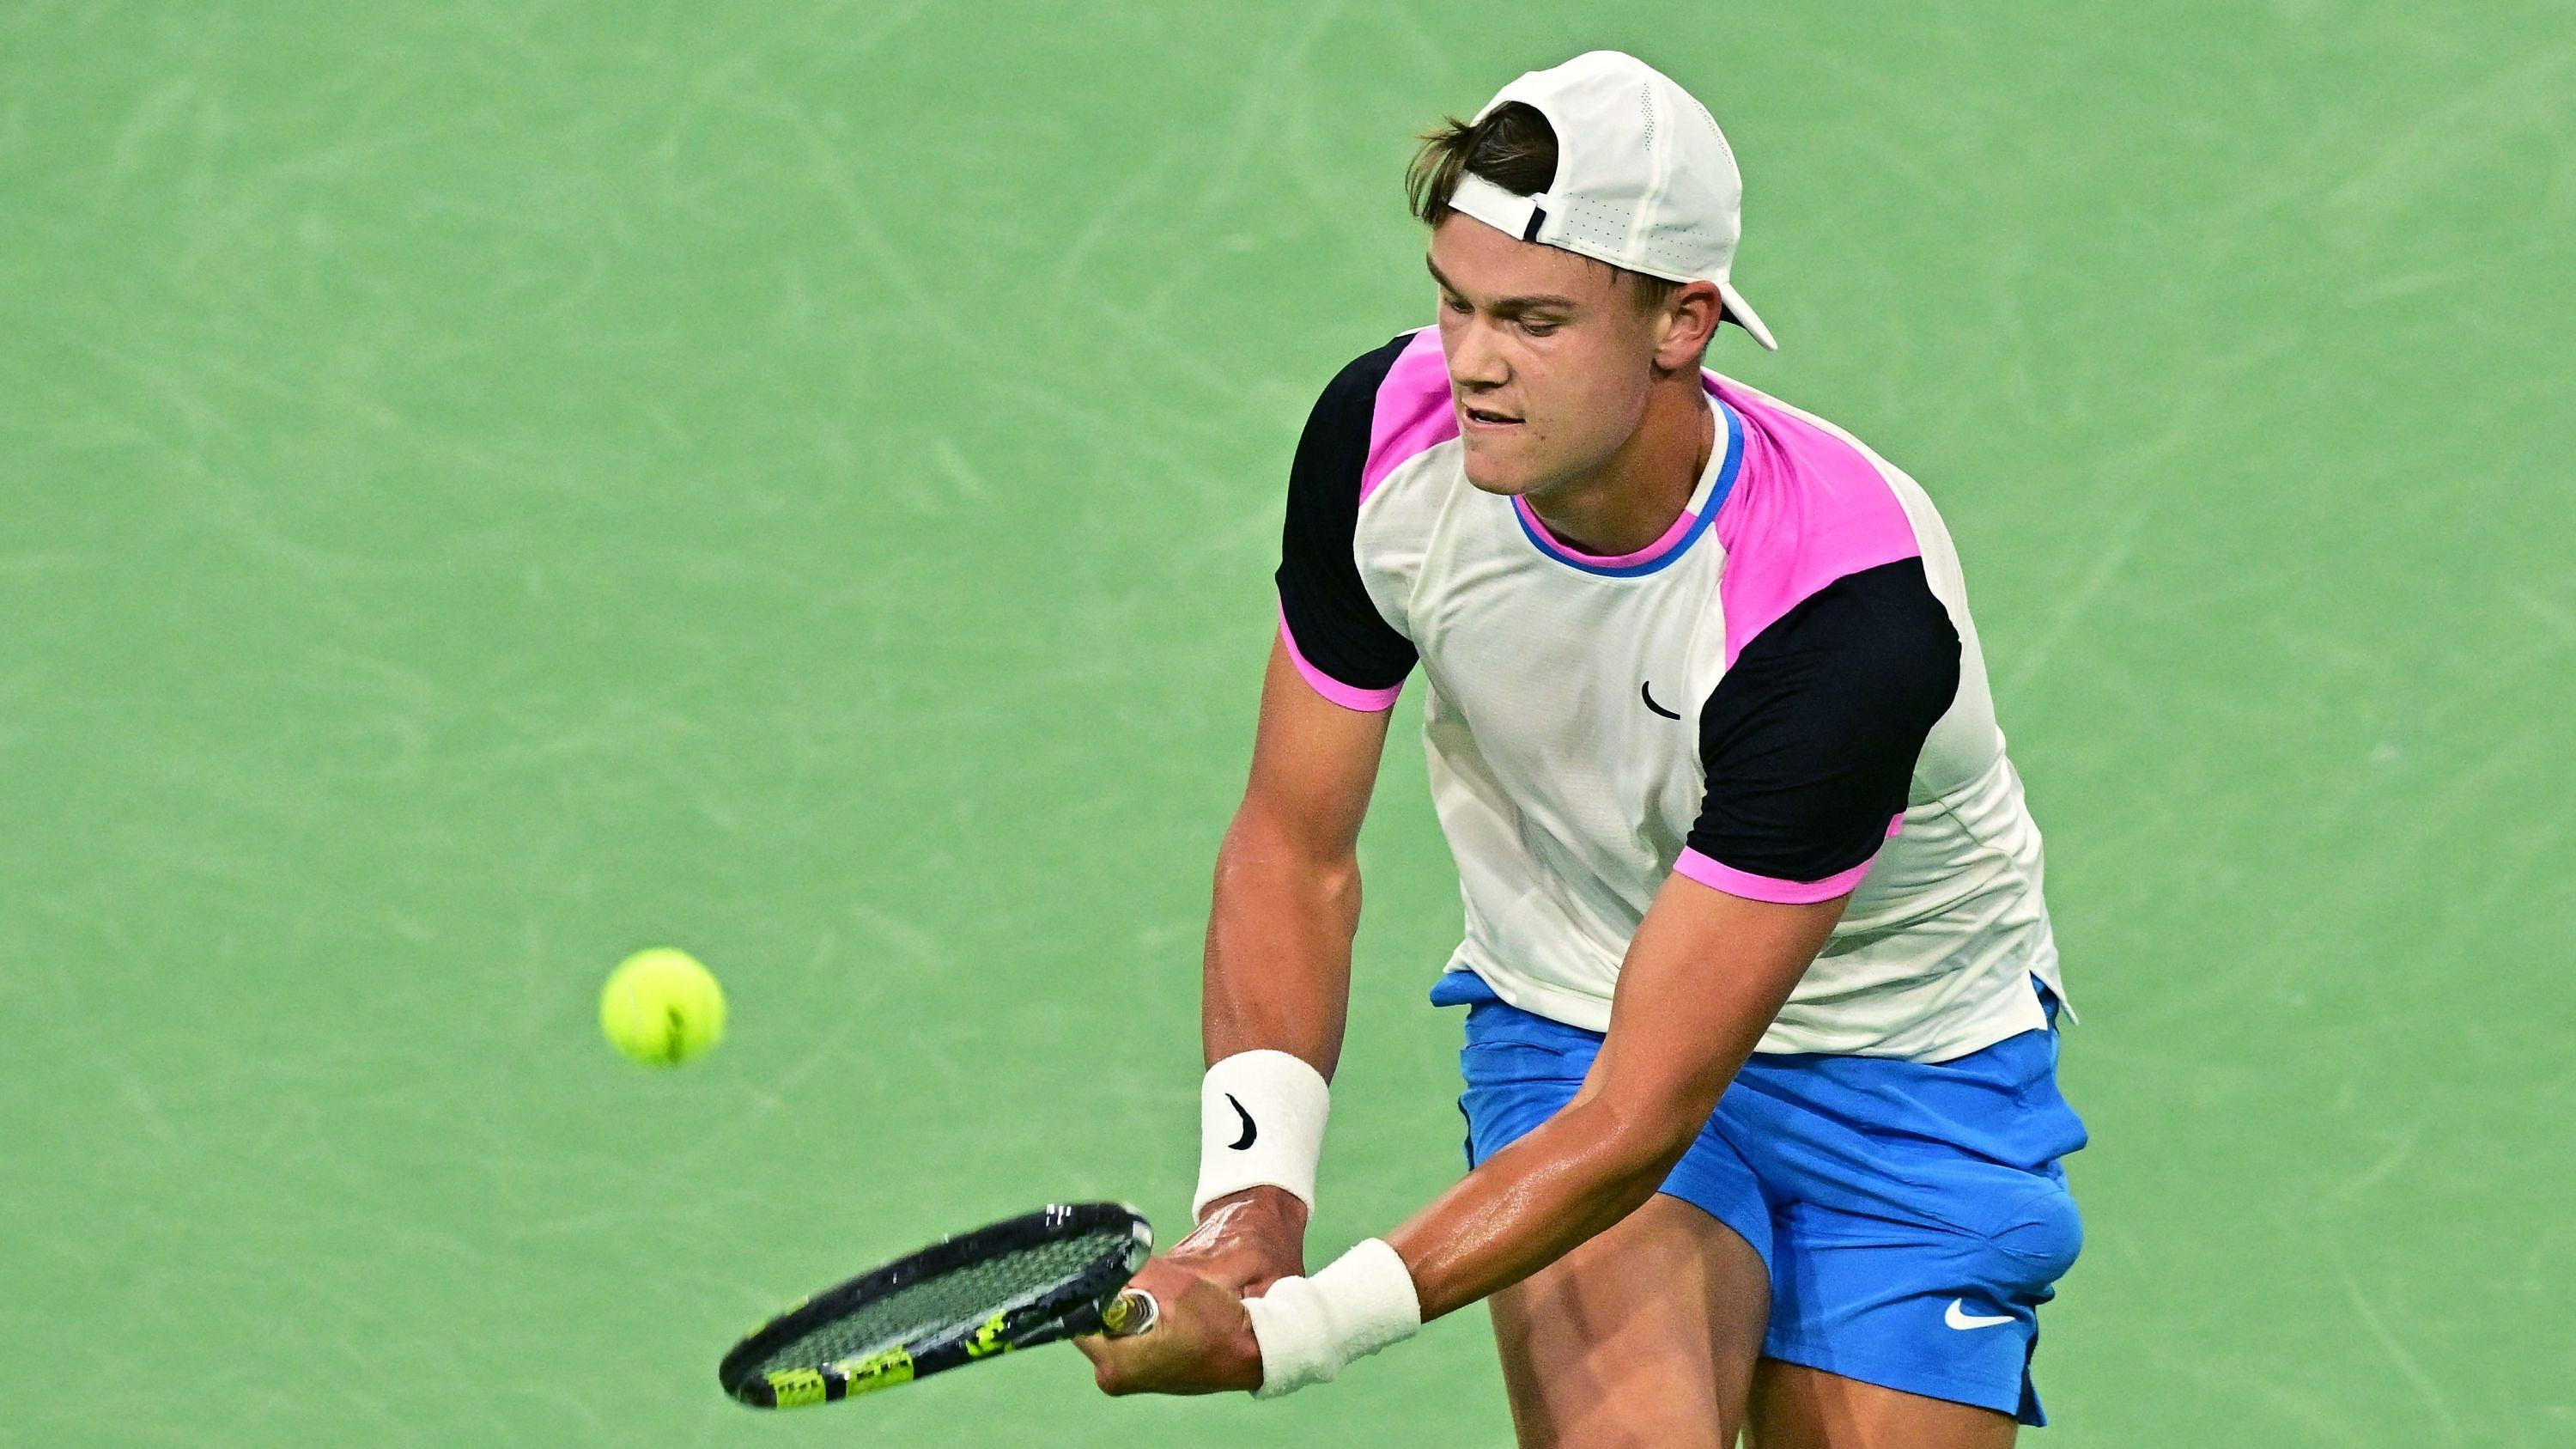 Tennis: Holger Rune pulverized by Fabian Marozsan, 57th, upon entry into contention in Miami